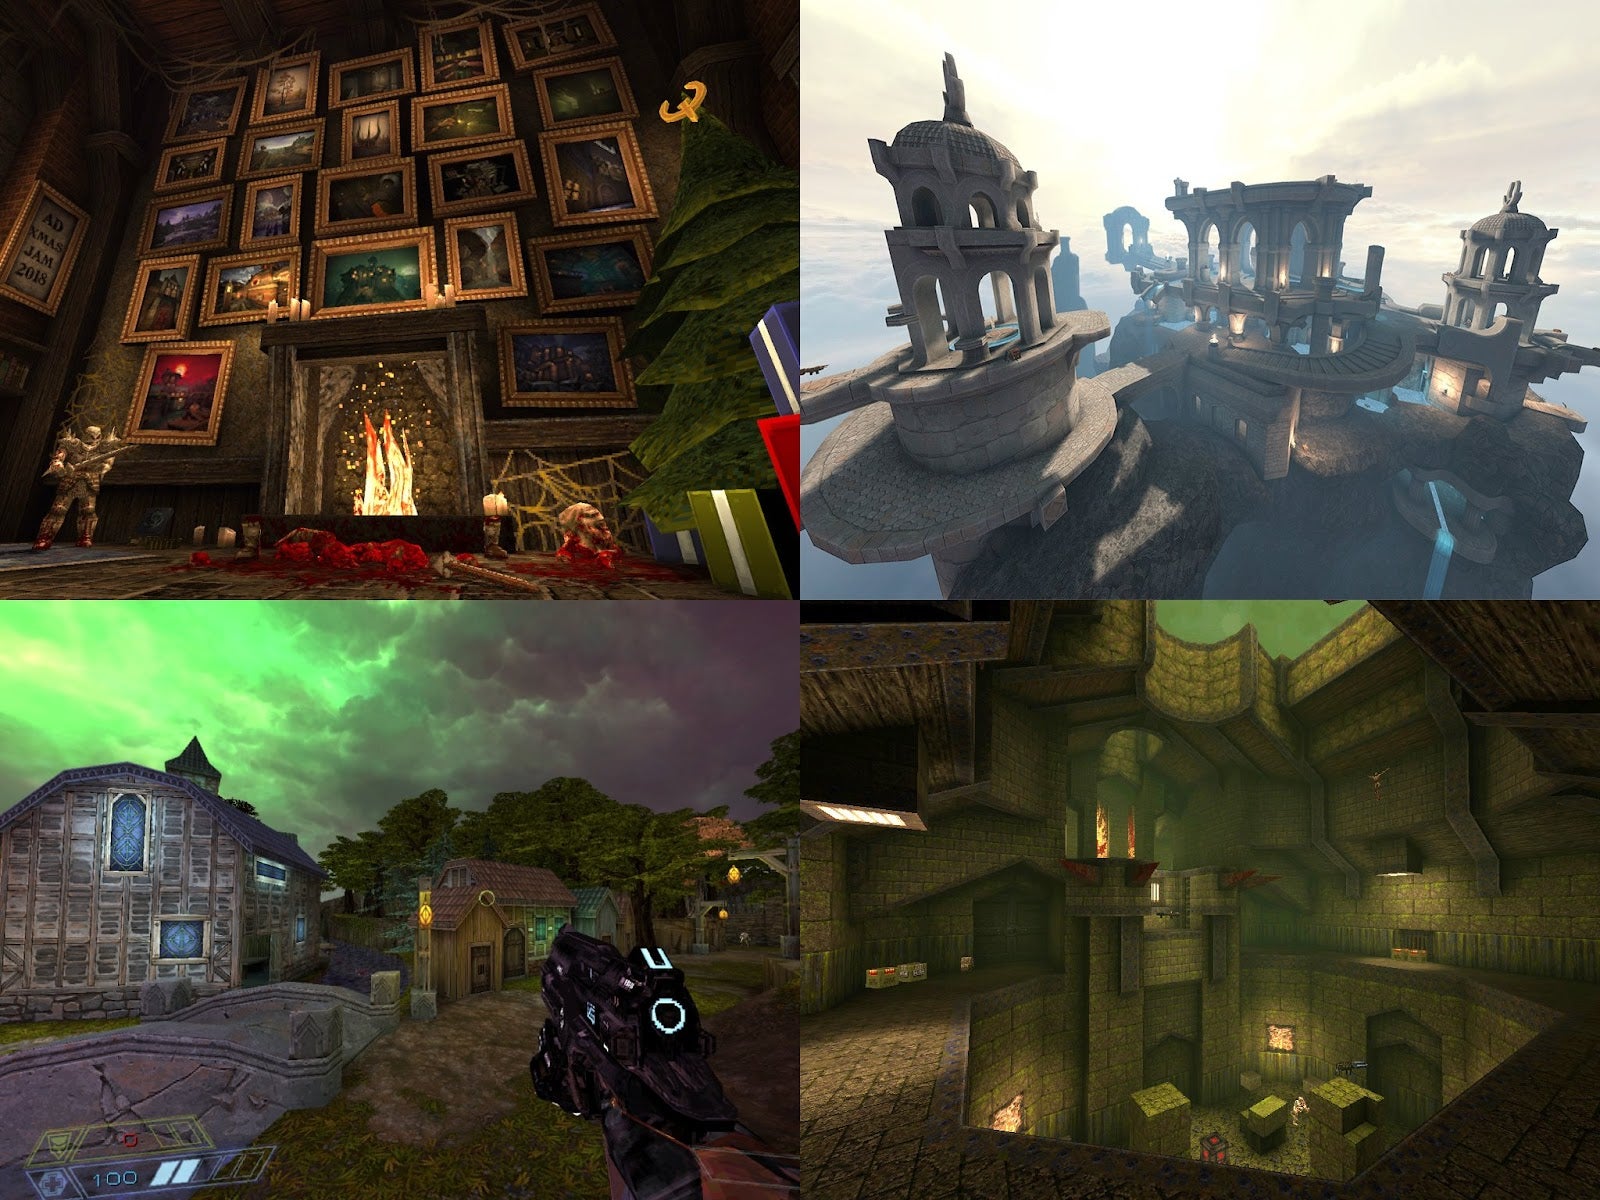 Clockwise from top-left: Quake mods Xmas Jam 2018, Tears of the False God, Underdark Overbright, Slayer's Testaments.